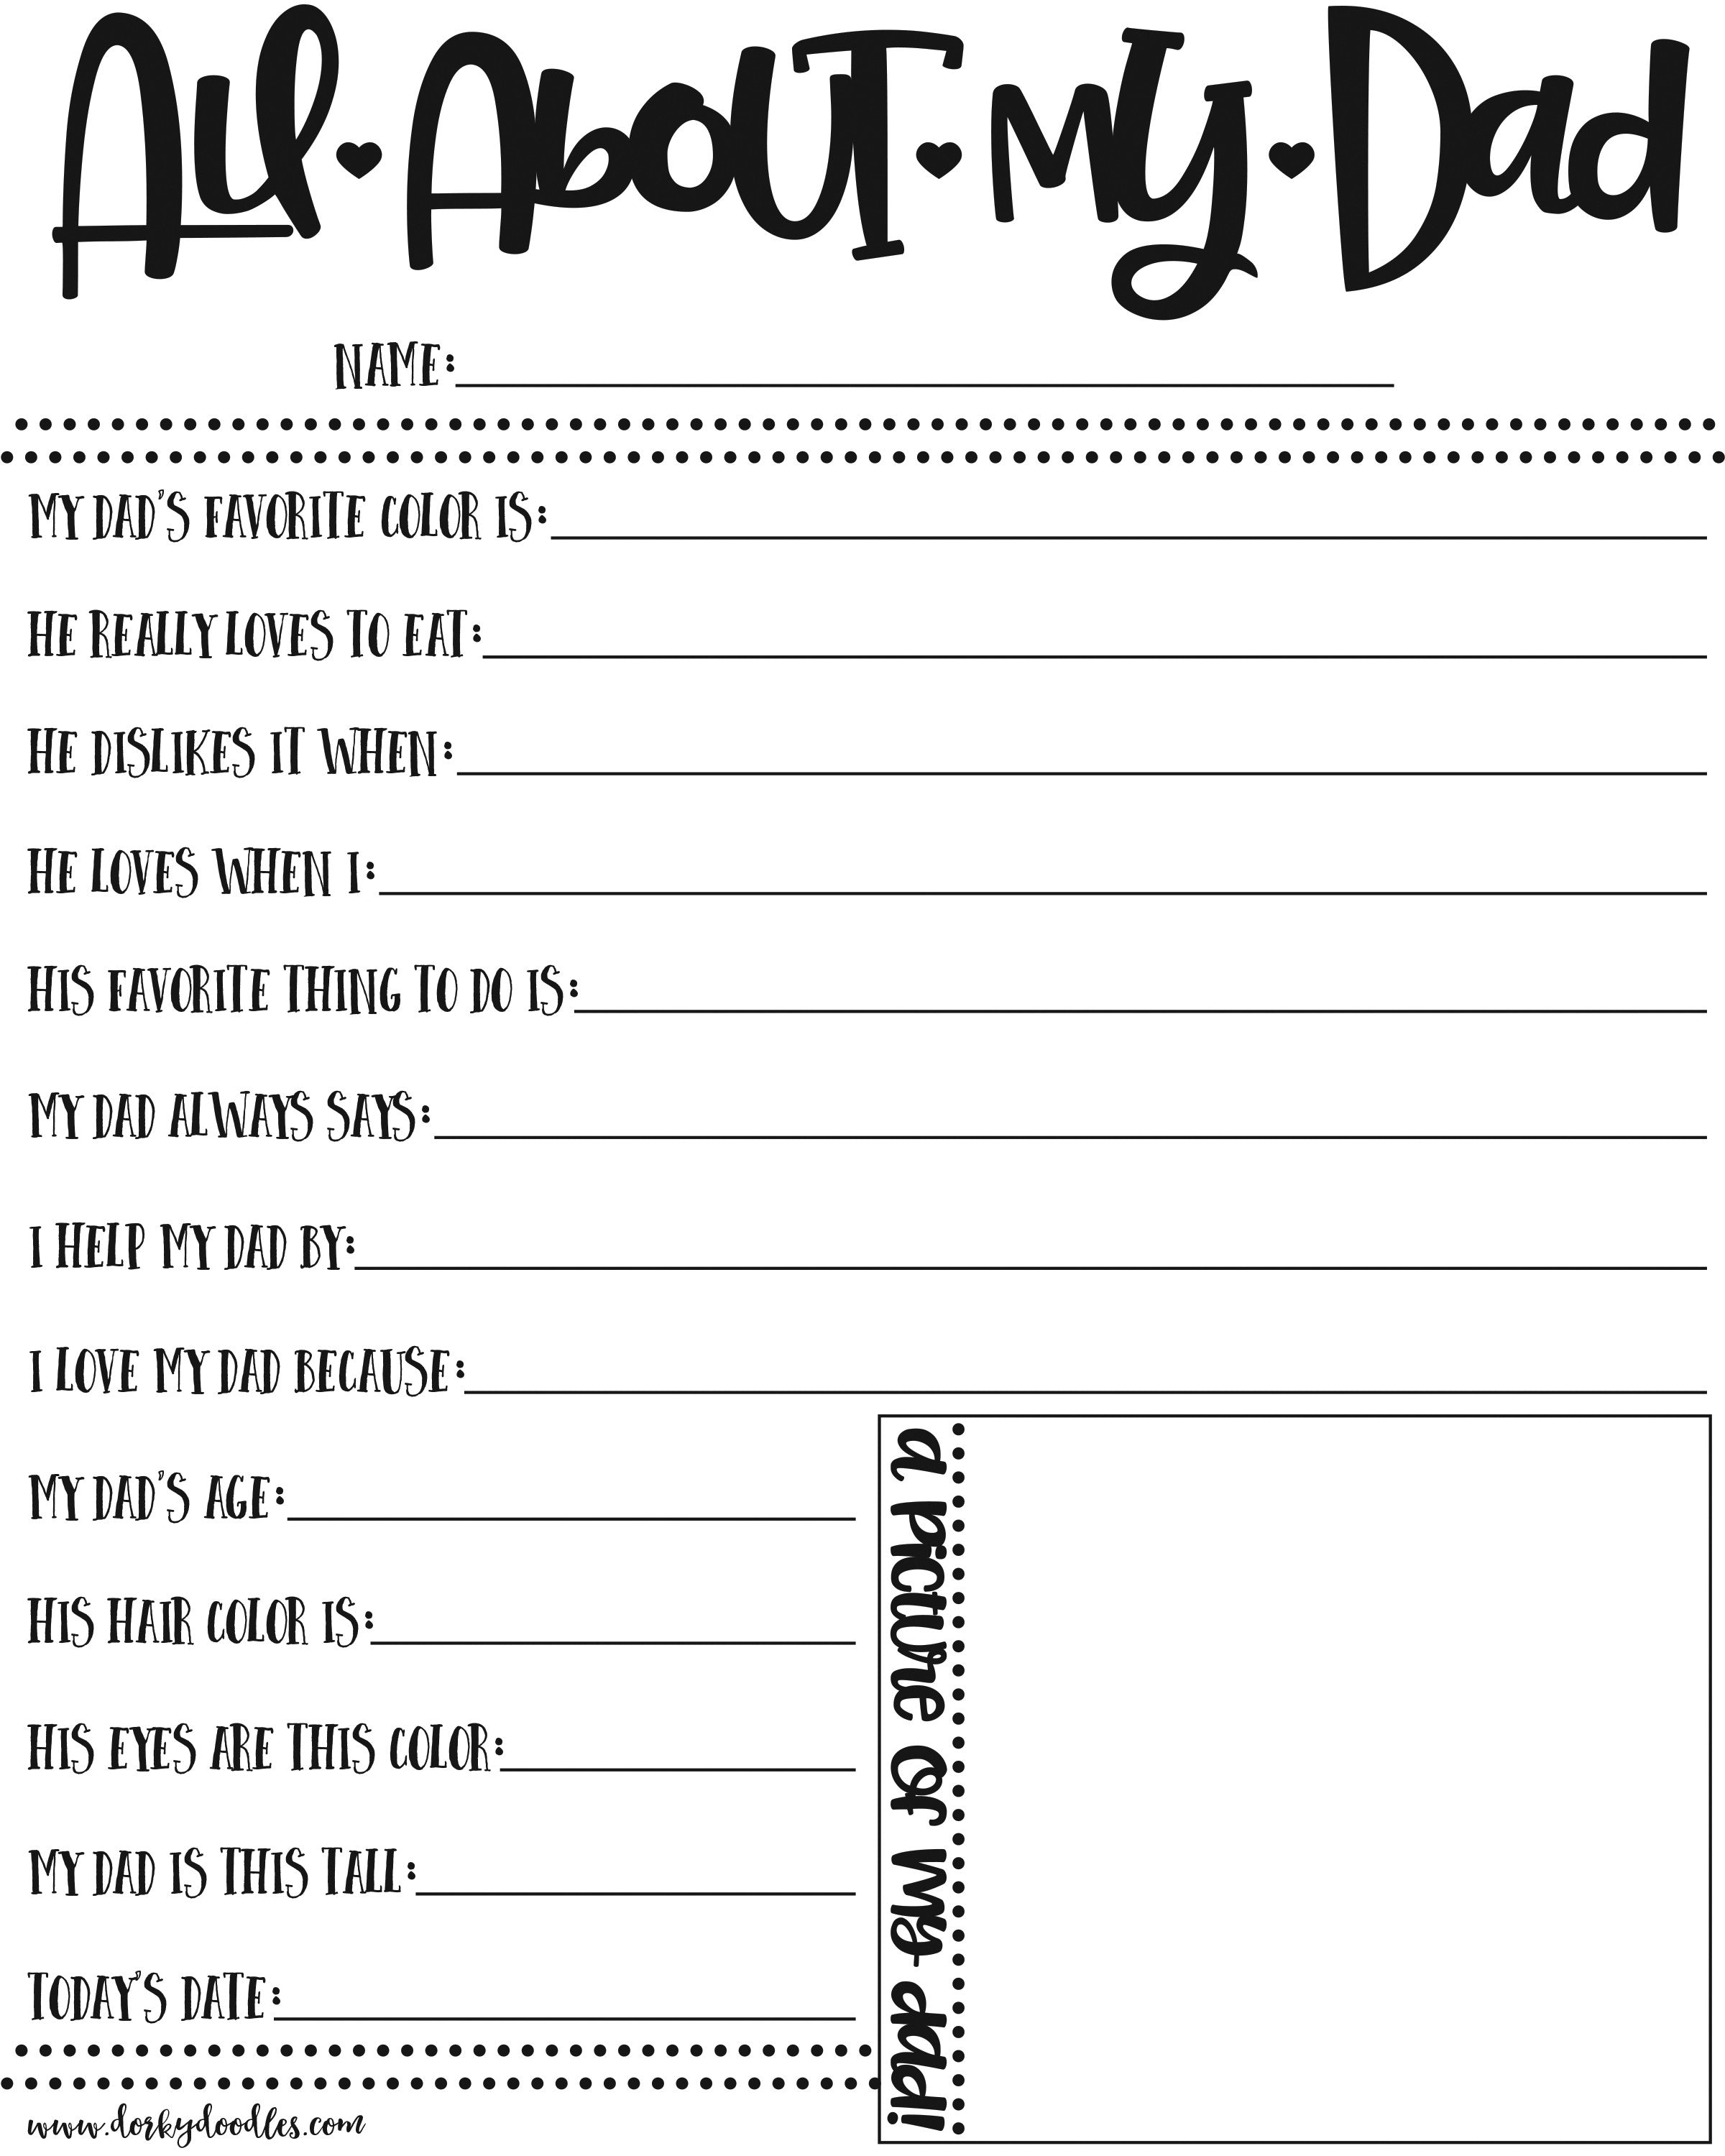 fathers-day-questionnaire-free-printable-printable-templates